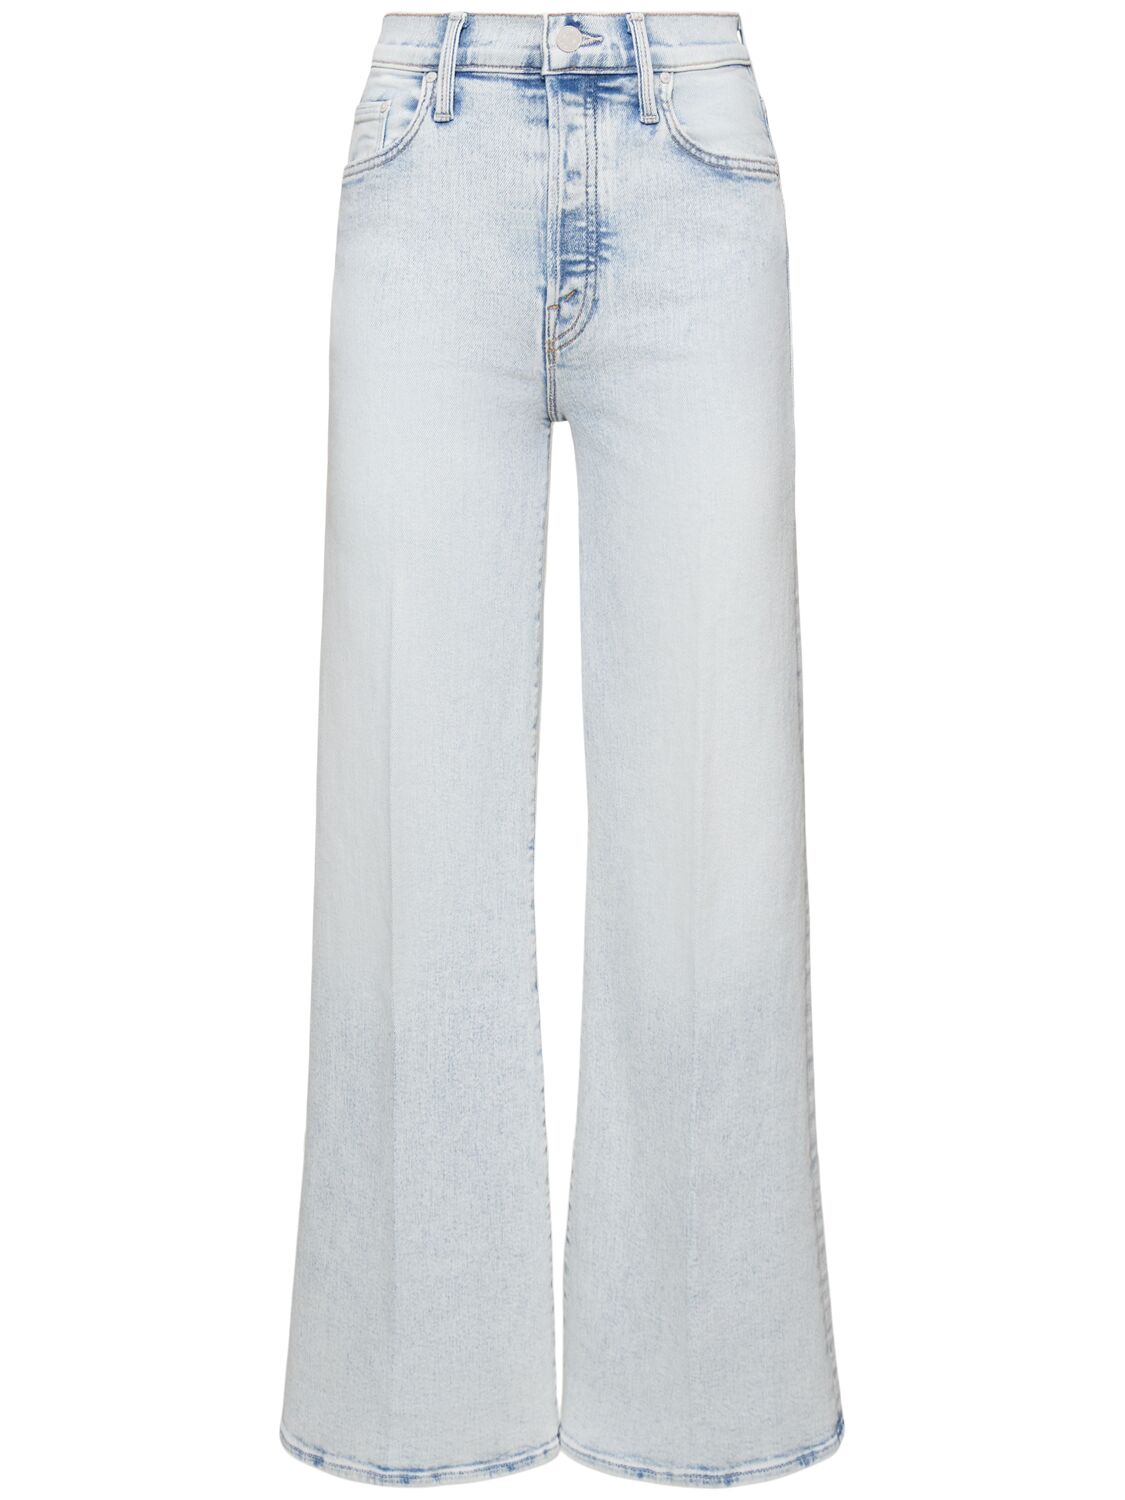 Image of The Tomcat Roller High Rise Jeans